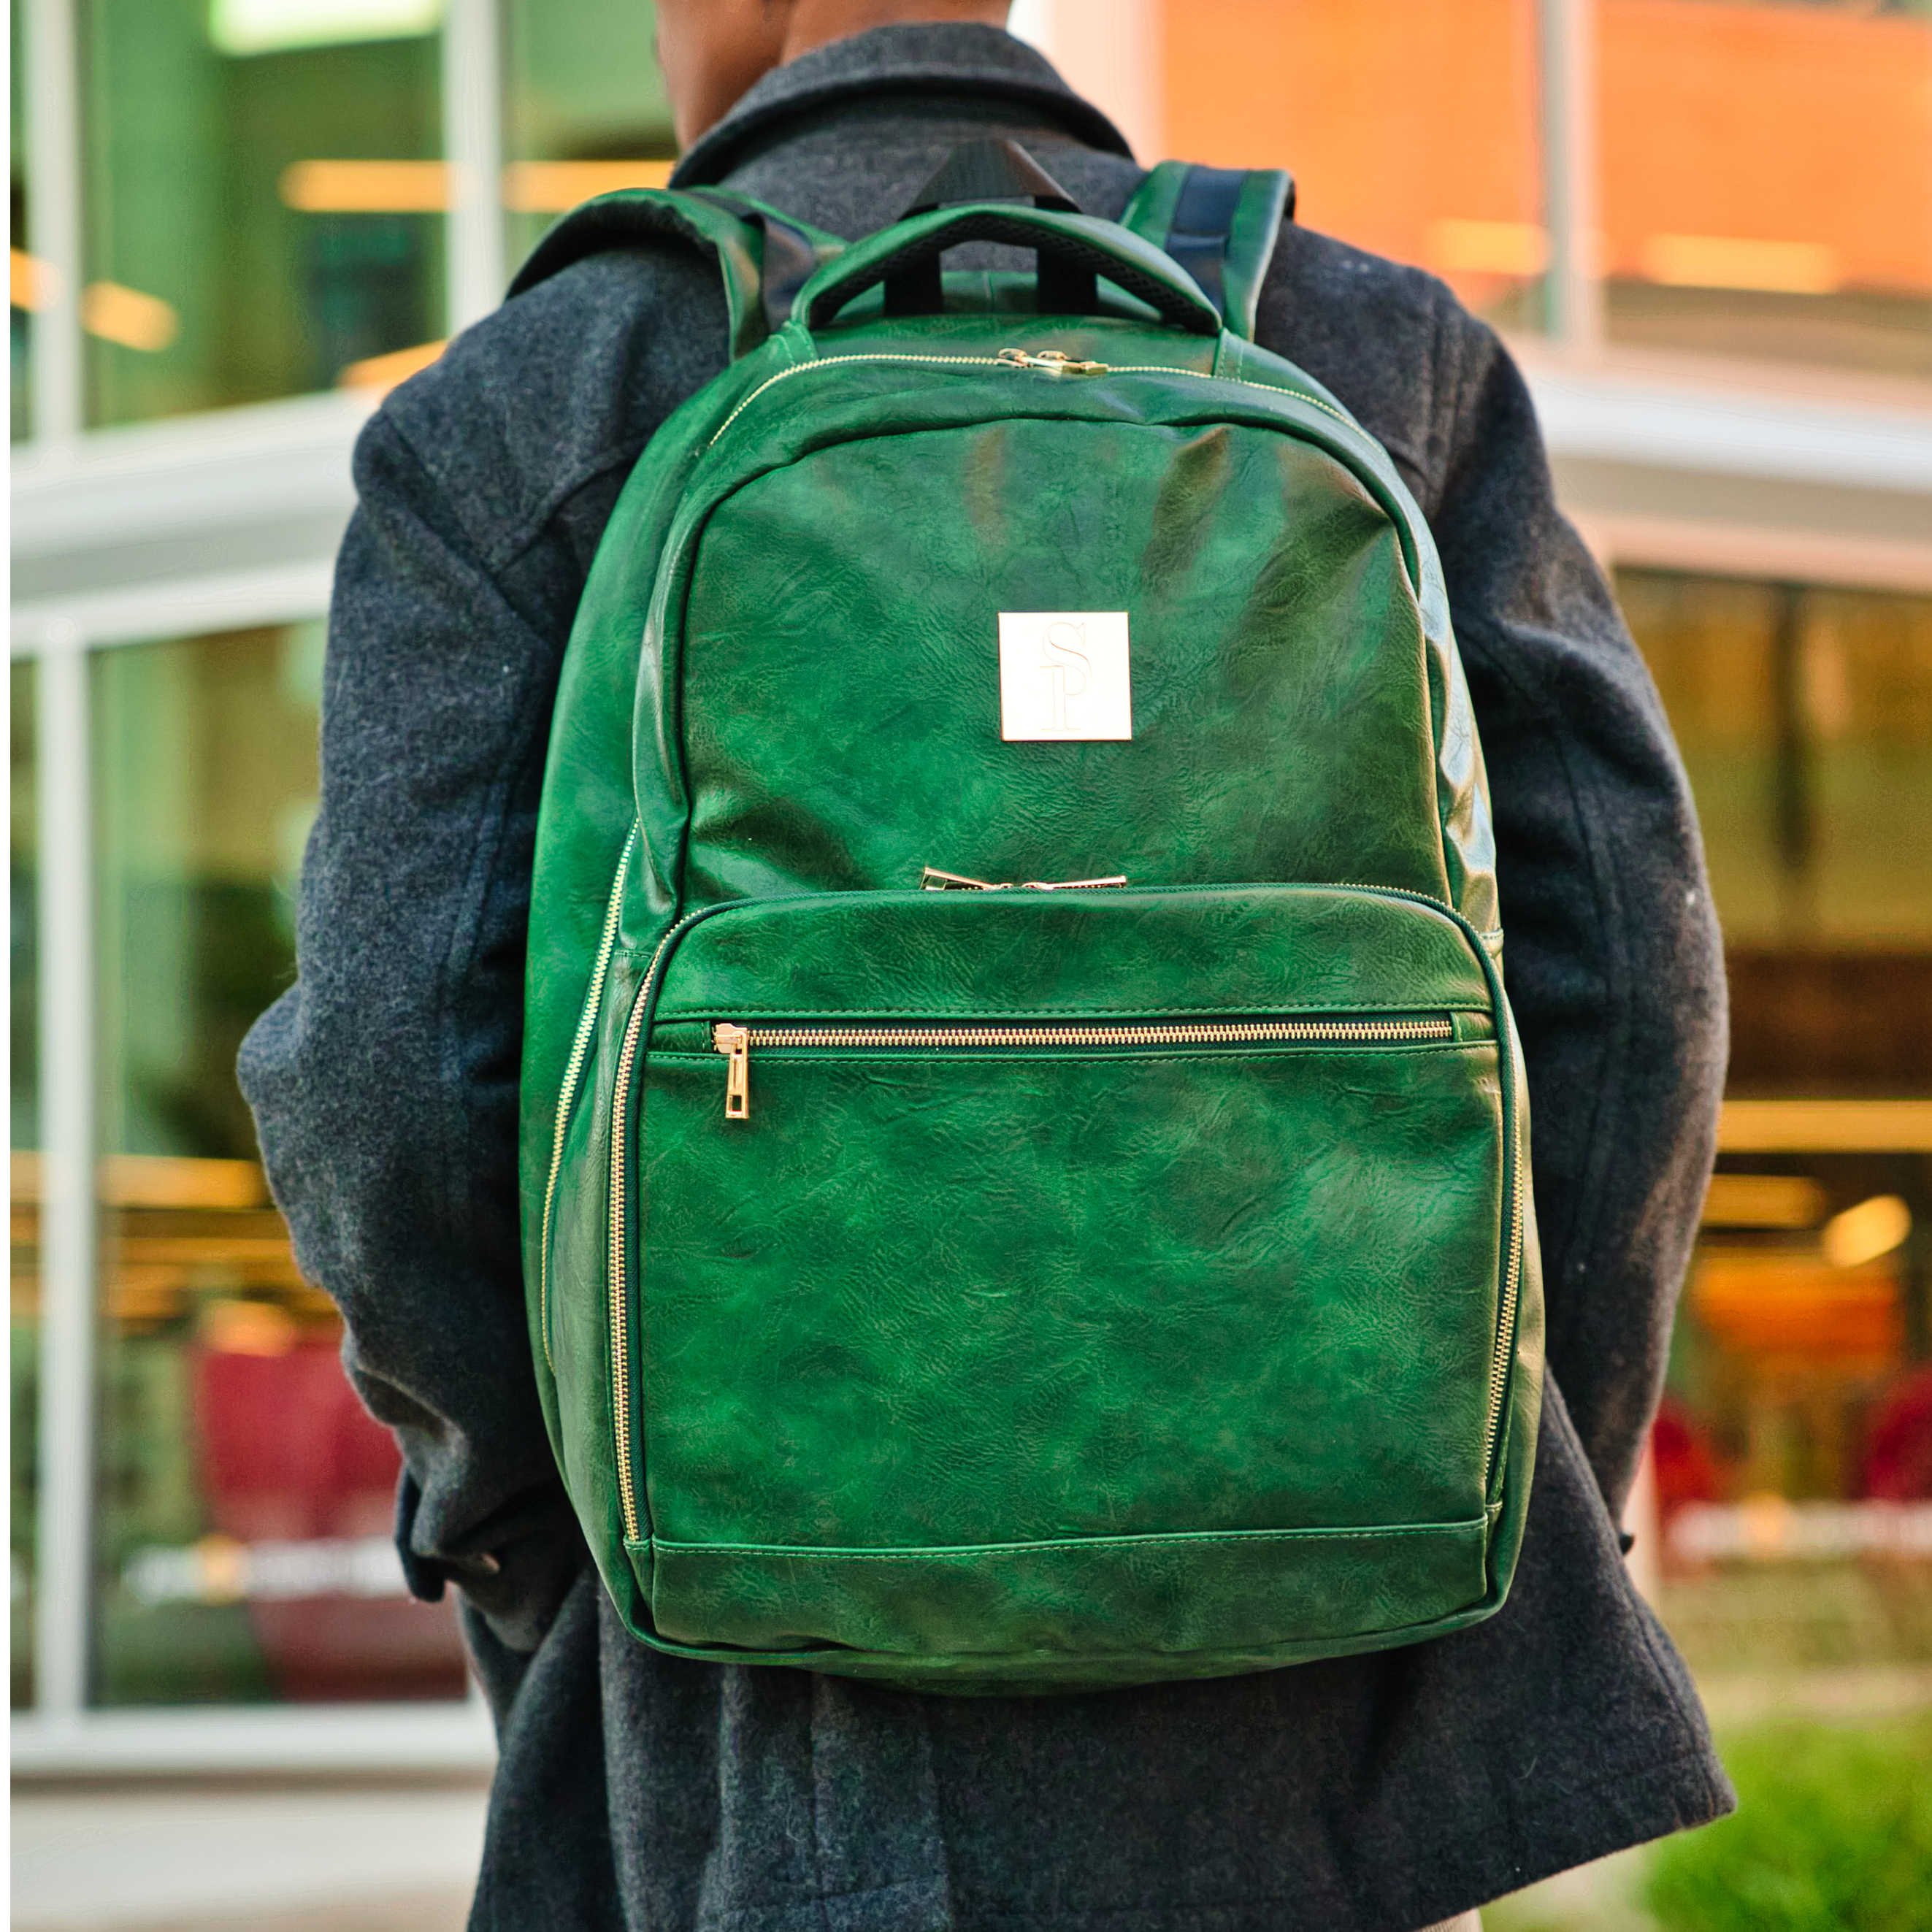 Emerald Green Tumbled Leather 2 Bag Set (Commuter Backpack and Duffle) - Sole Premise